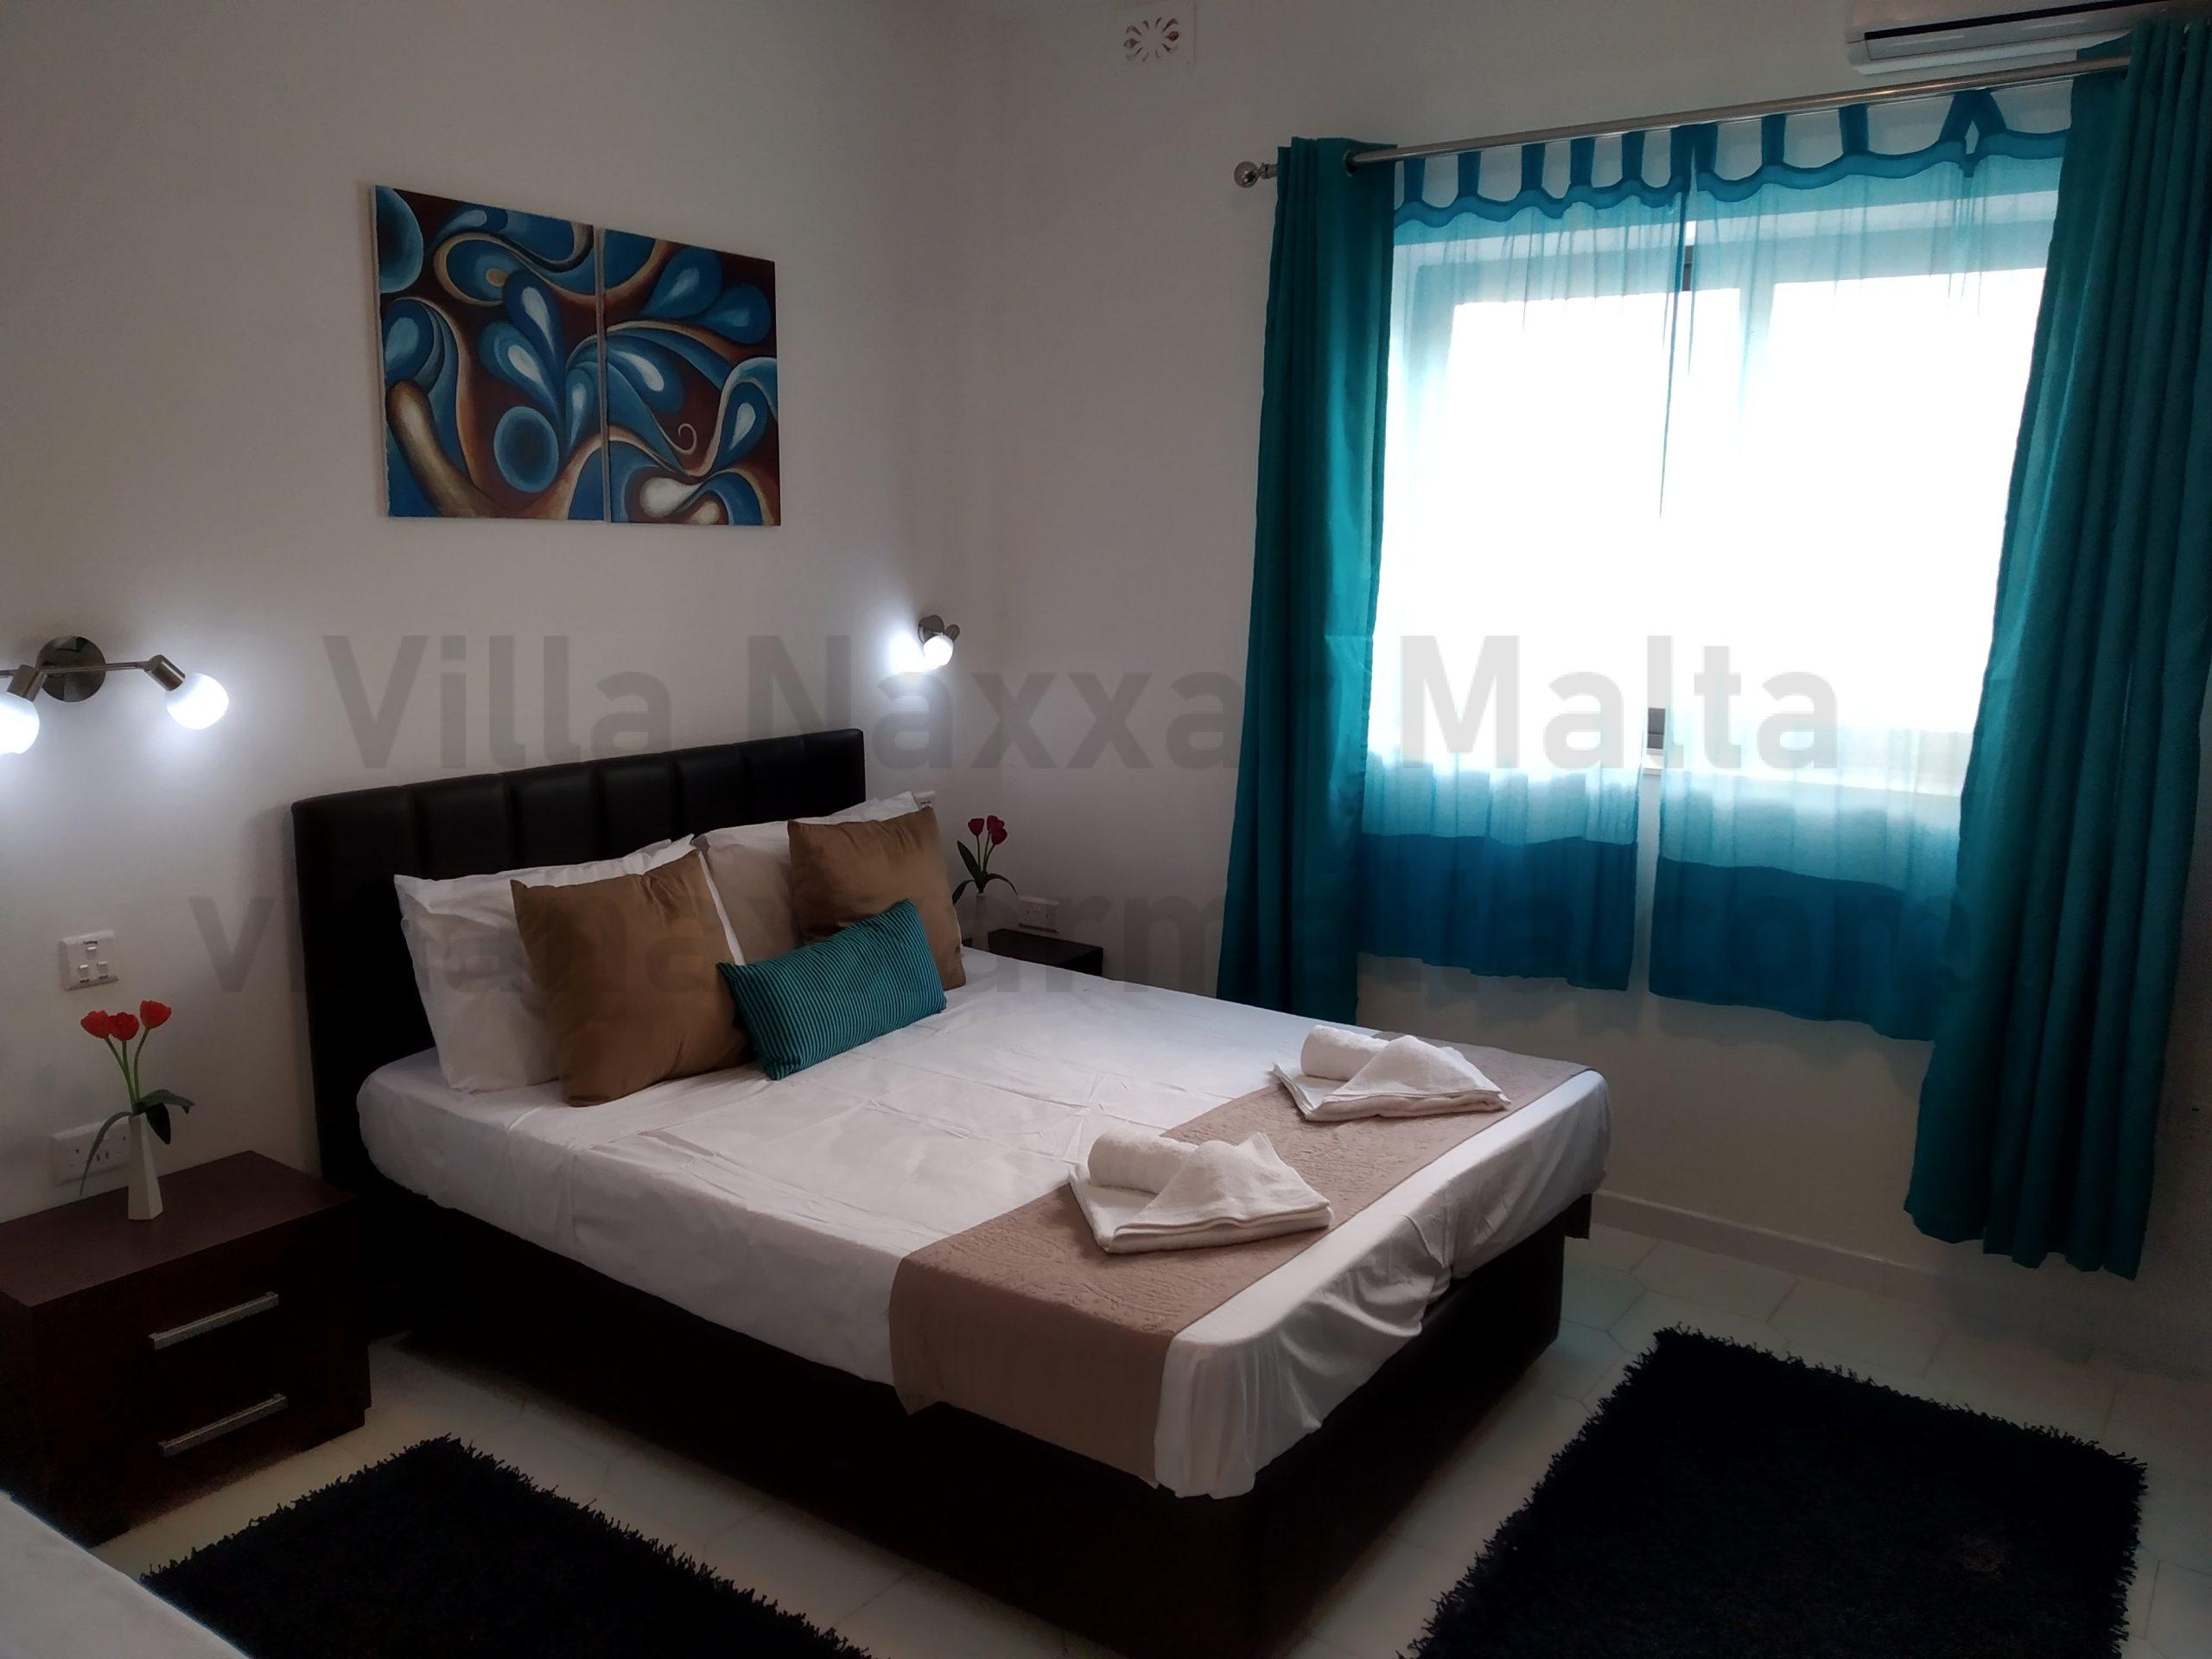 Villa Naxxar Malta – Second Bedroom (double Bed) with large wardrobes, AC, WIFI and more ... space for additional beds